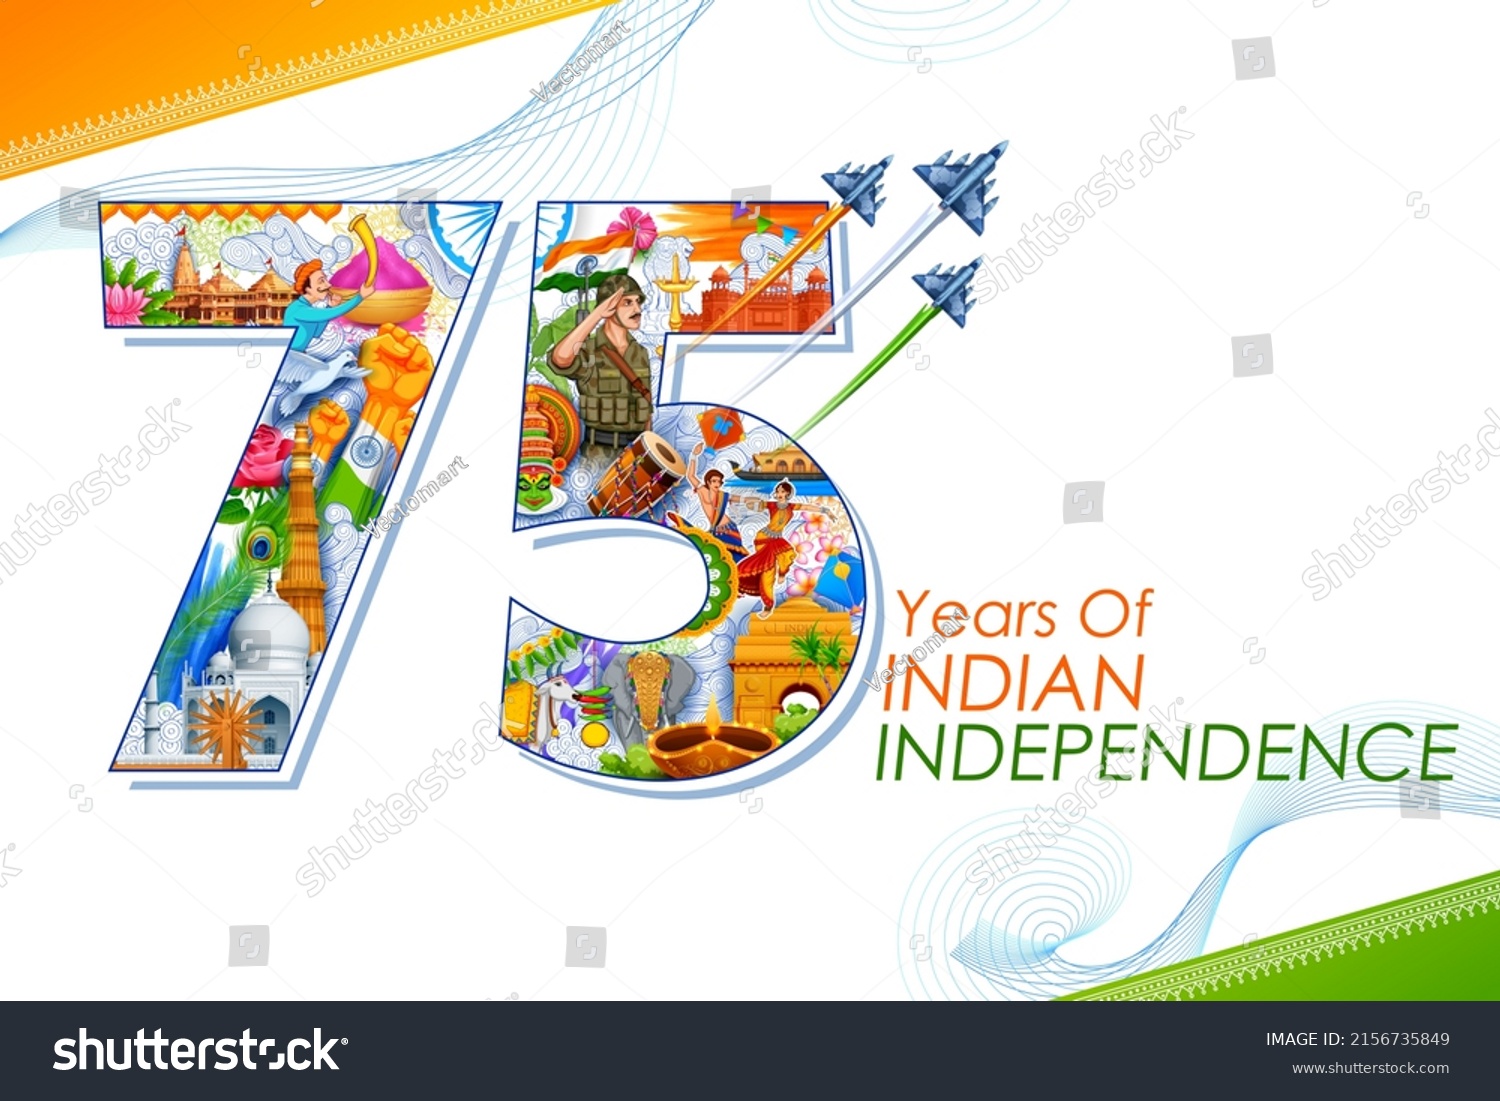 SVG of illustration of tricolor banner with Indian flag for 75th Independence Day of India on 15th August svg